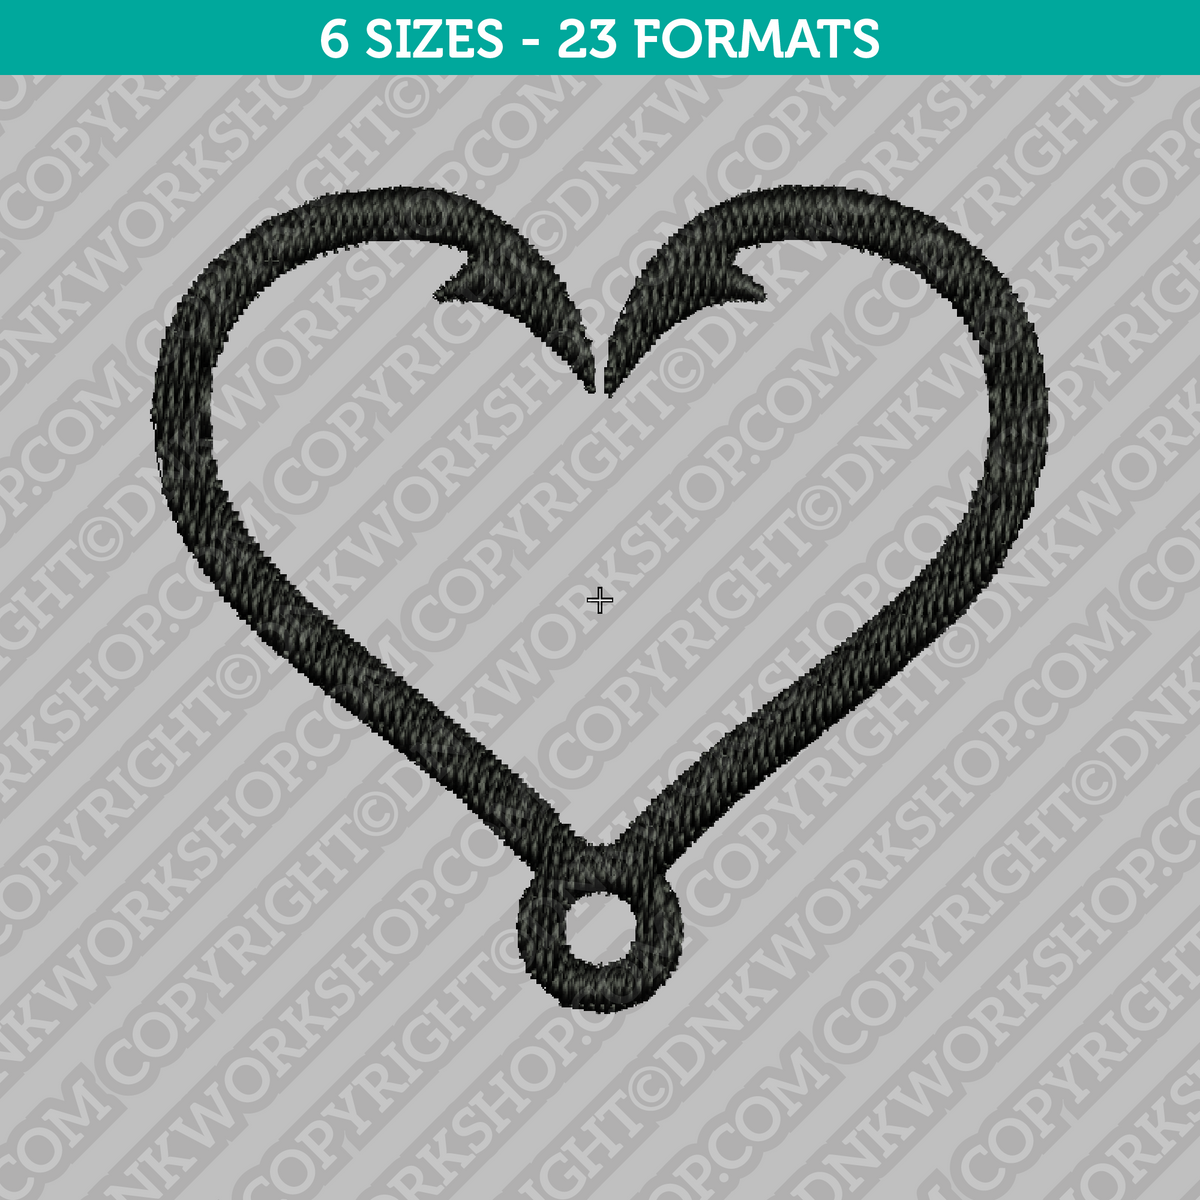 Fish Hook Heart Embroidery Design - 6 Sizes - INSTANT DOWNLOAD